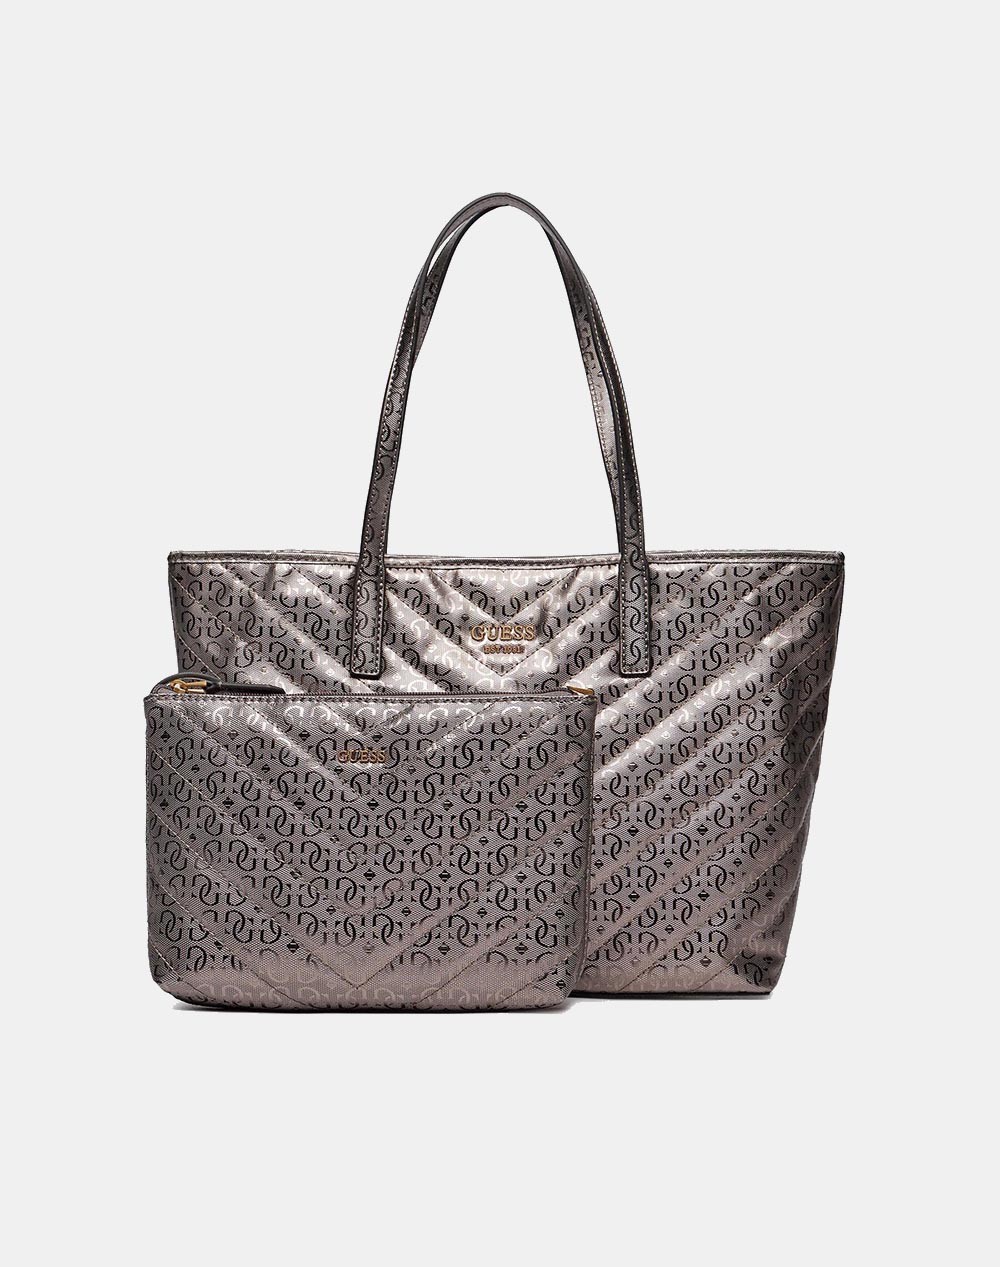 GUESS VIKKY TOTE ΤΣΑΝΤΑ ΓΥΝΑΙΚΕΙΟ (Διαστάσεις: 32.5/41 x 26.5 x 15 εκ.) HWGS6995280-PEW Mixed